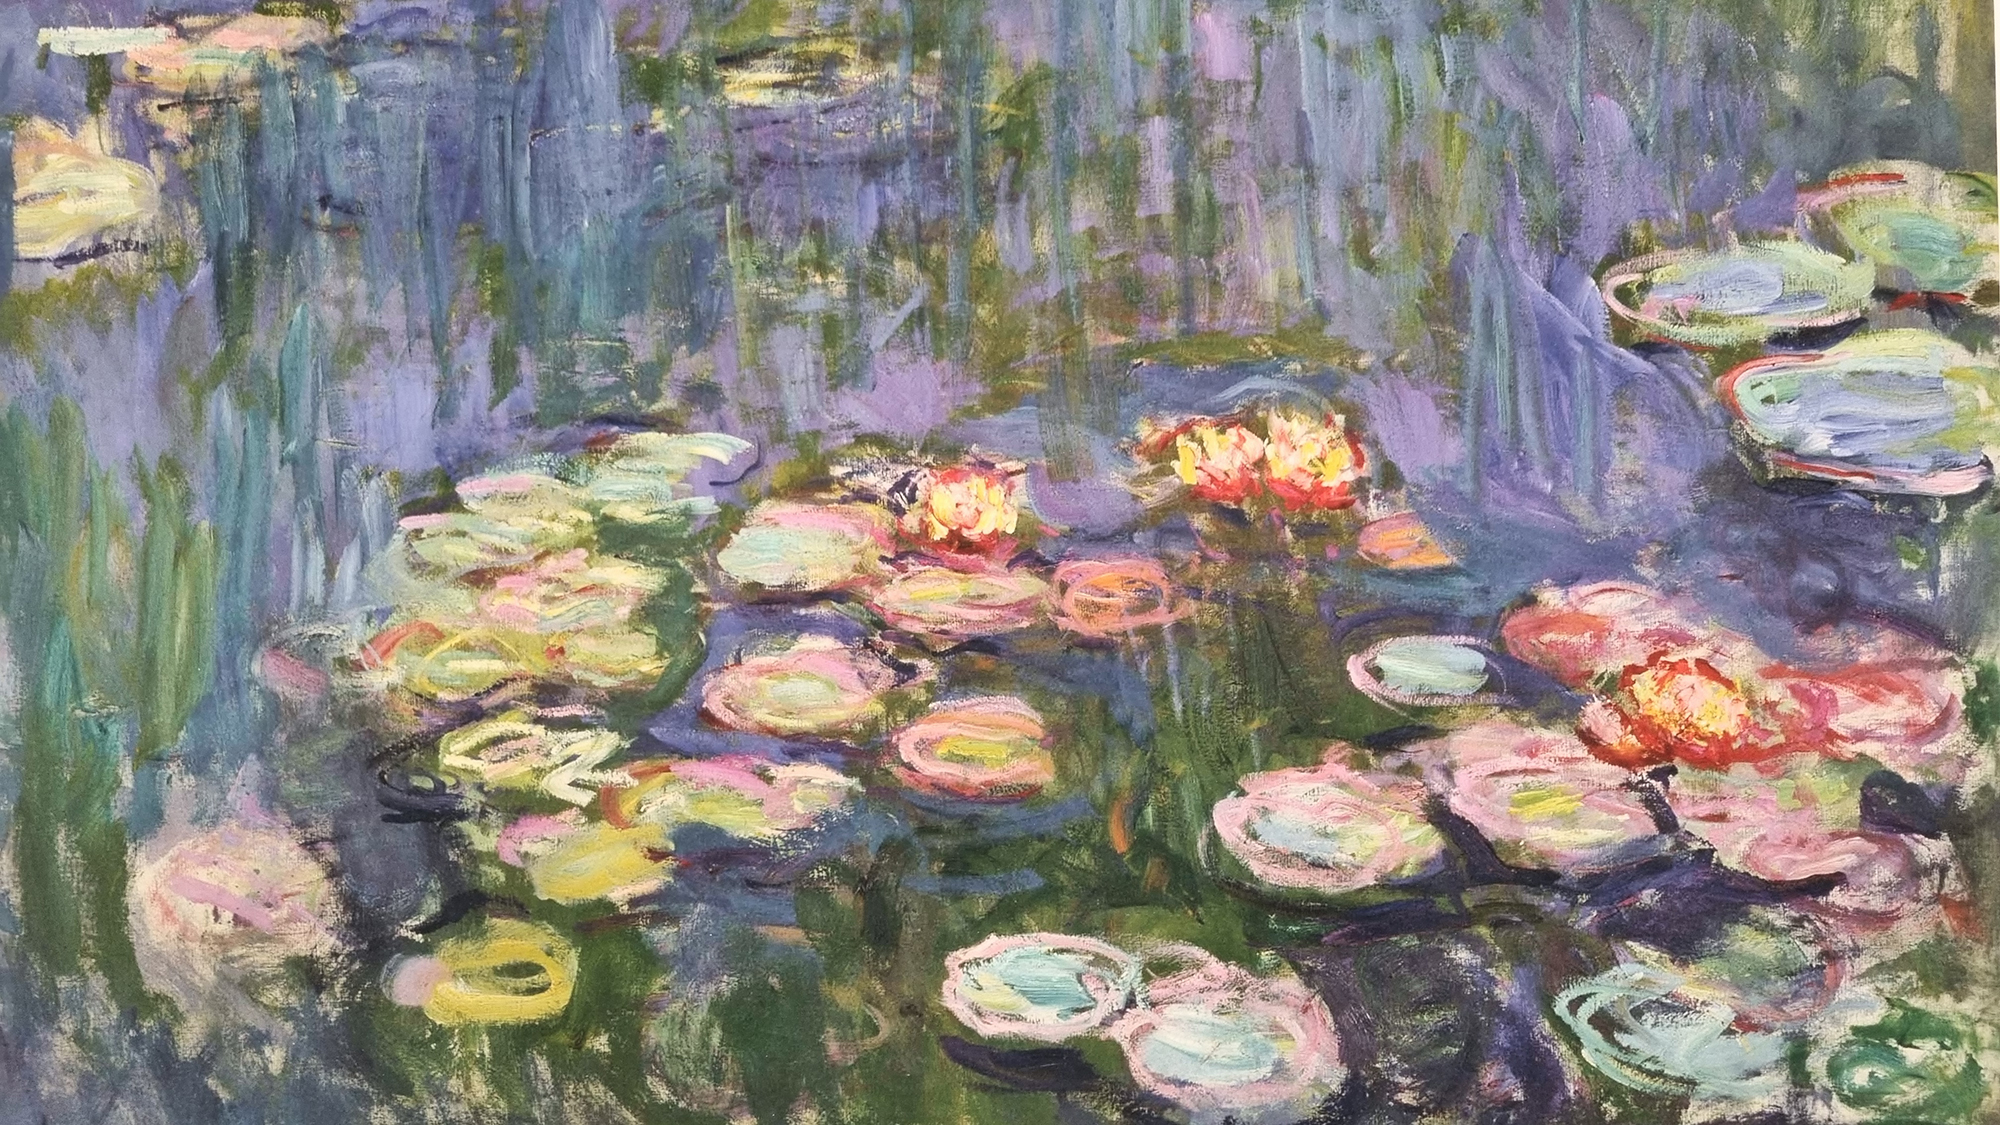 Claude Monet Limited Edition "Water Lilies, 1916" One of only 95 Published. - Image 5 of 7